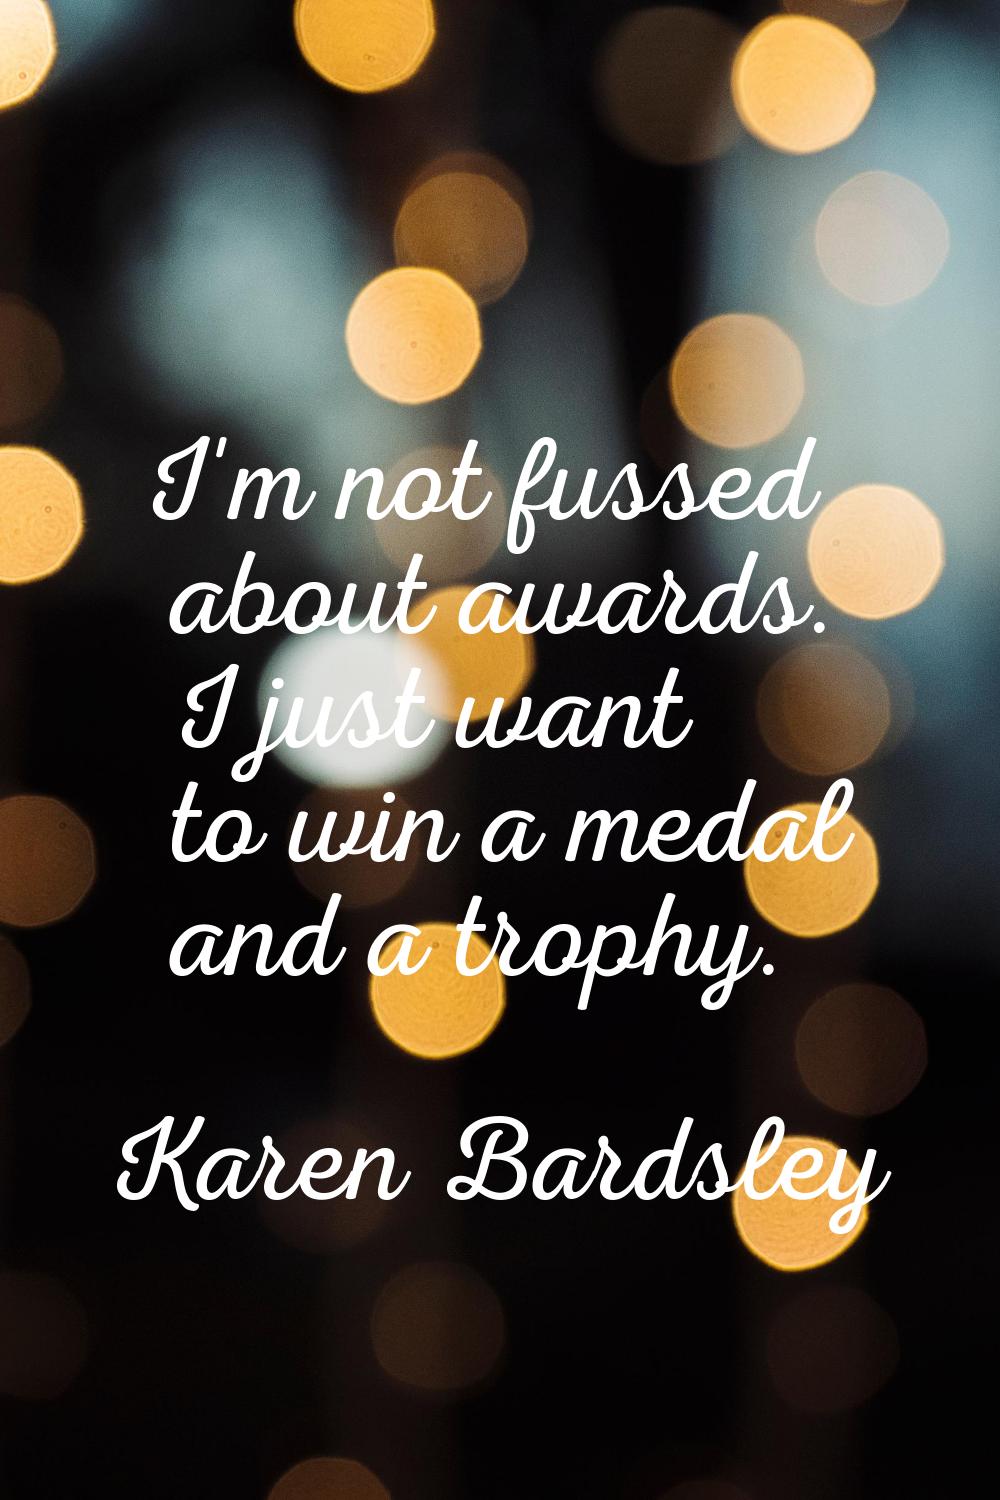 I'm not fussed about awards. I just want to win a medal and a trophy.